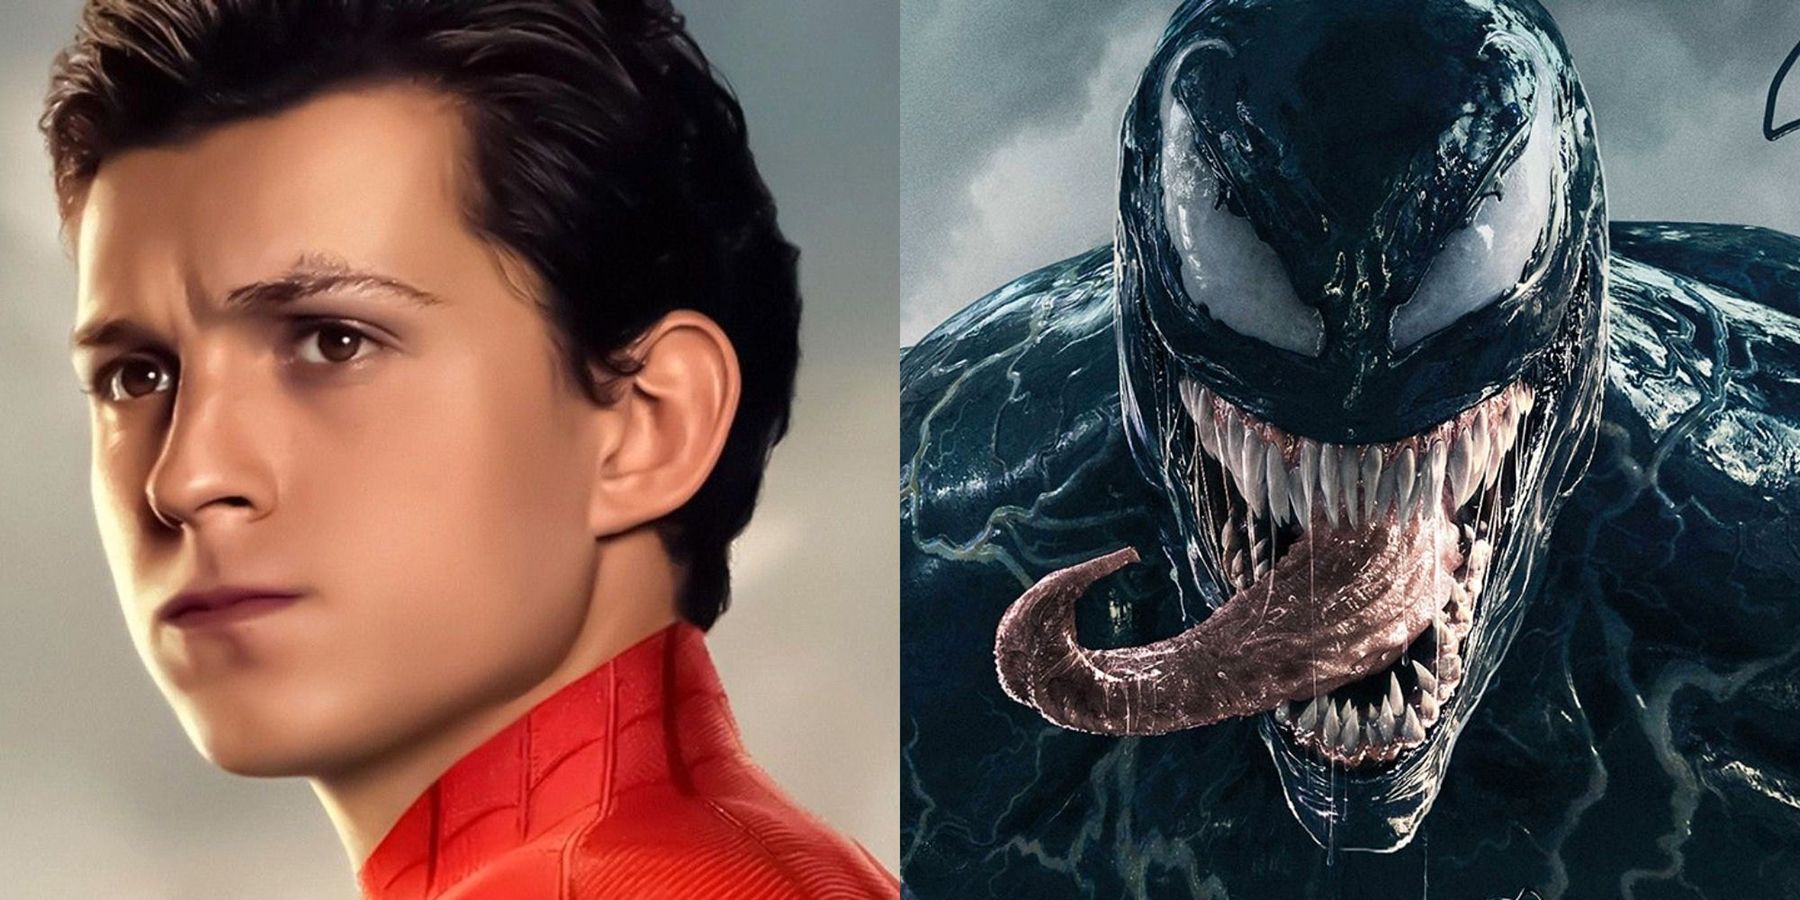 Tom Holland's Spider-Man Gets His Black Suit In This 'Venomverse' Fan Art